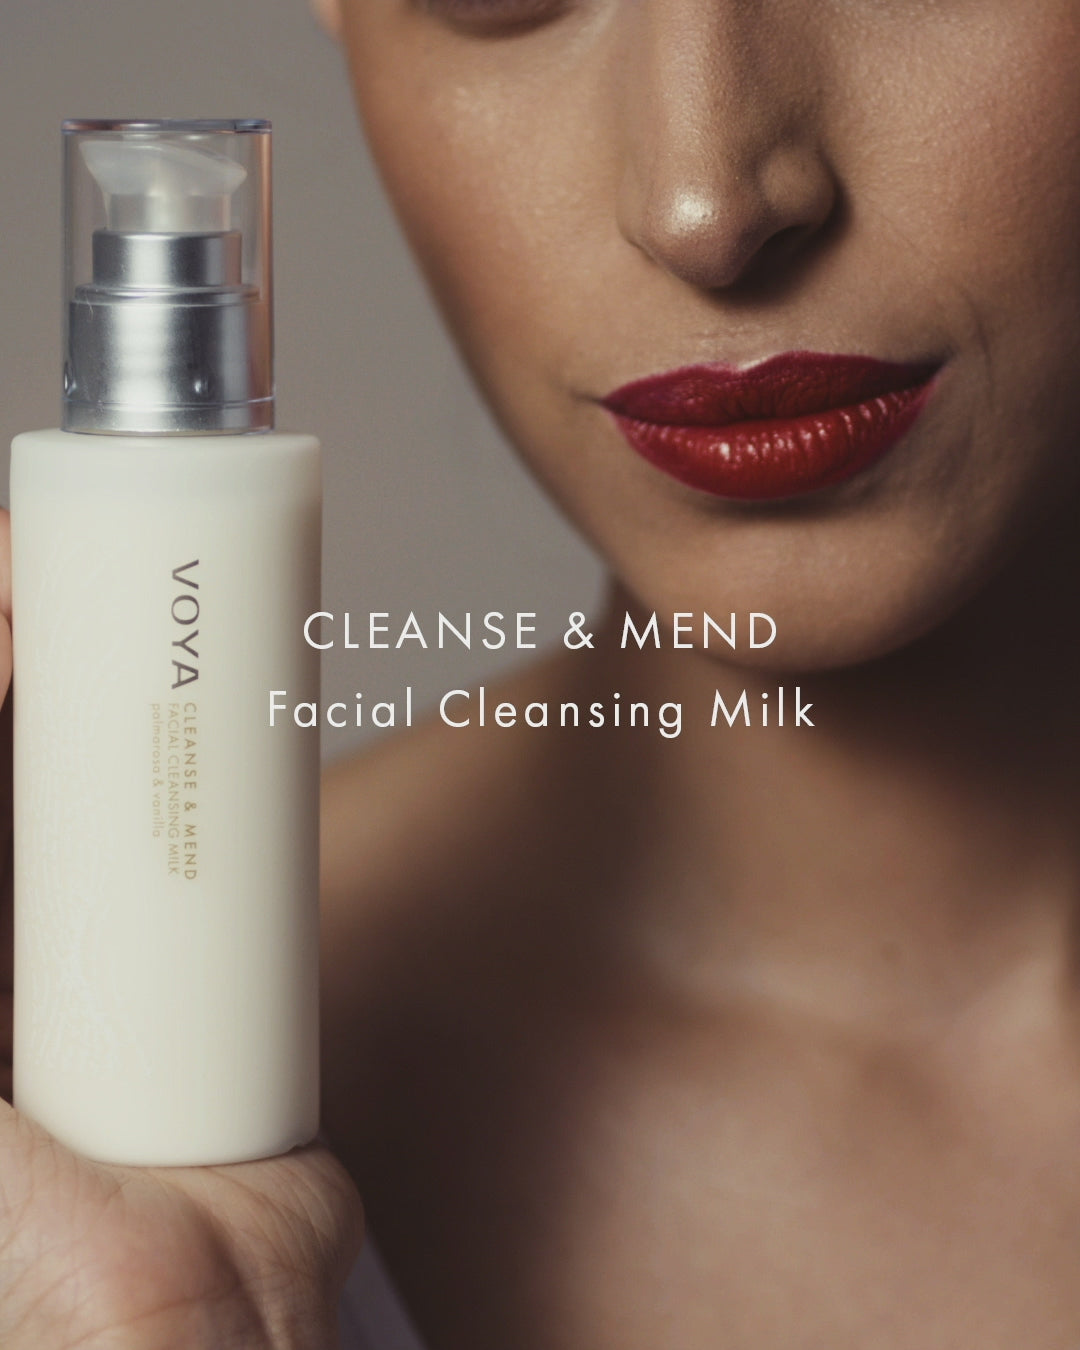 VOYA Cleanse and Mend: Facial Cleansing Milk